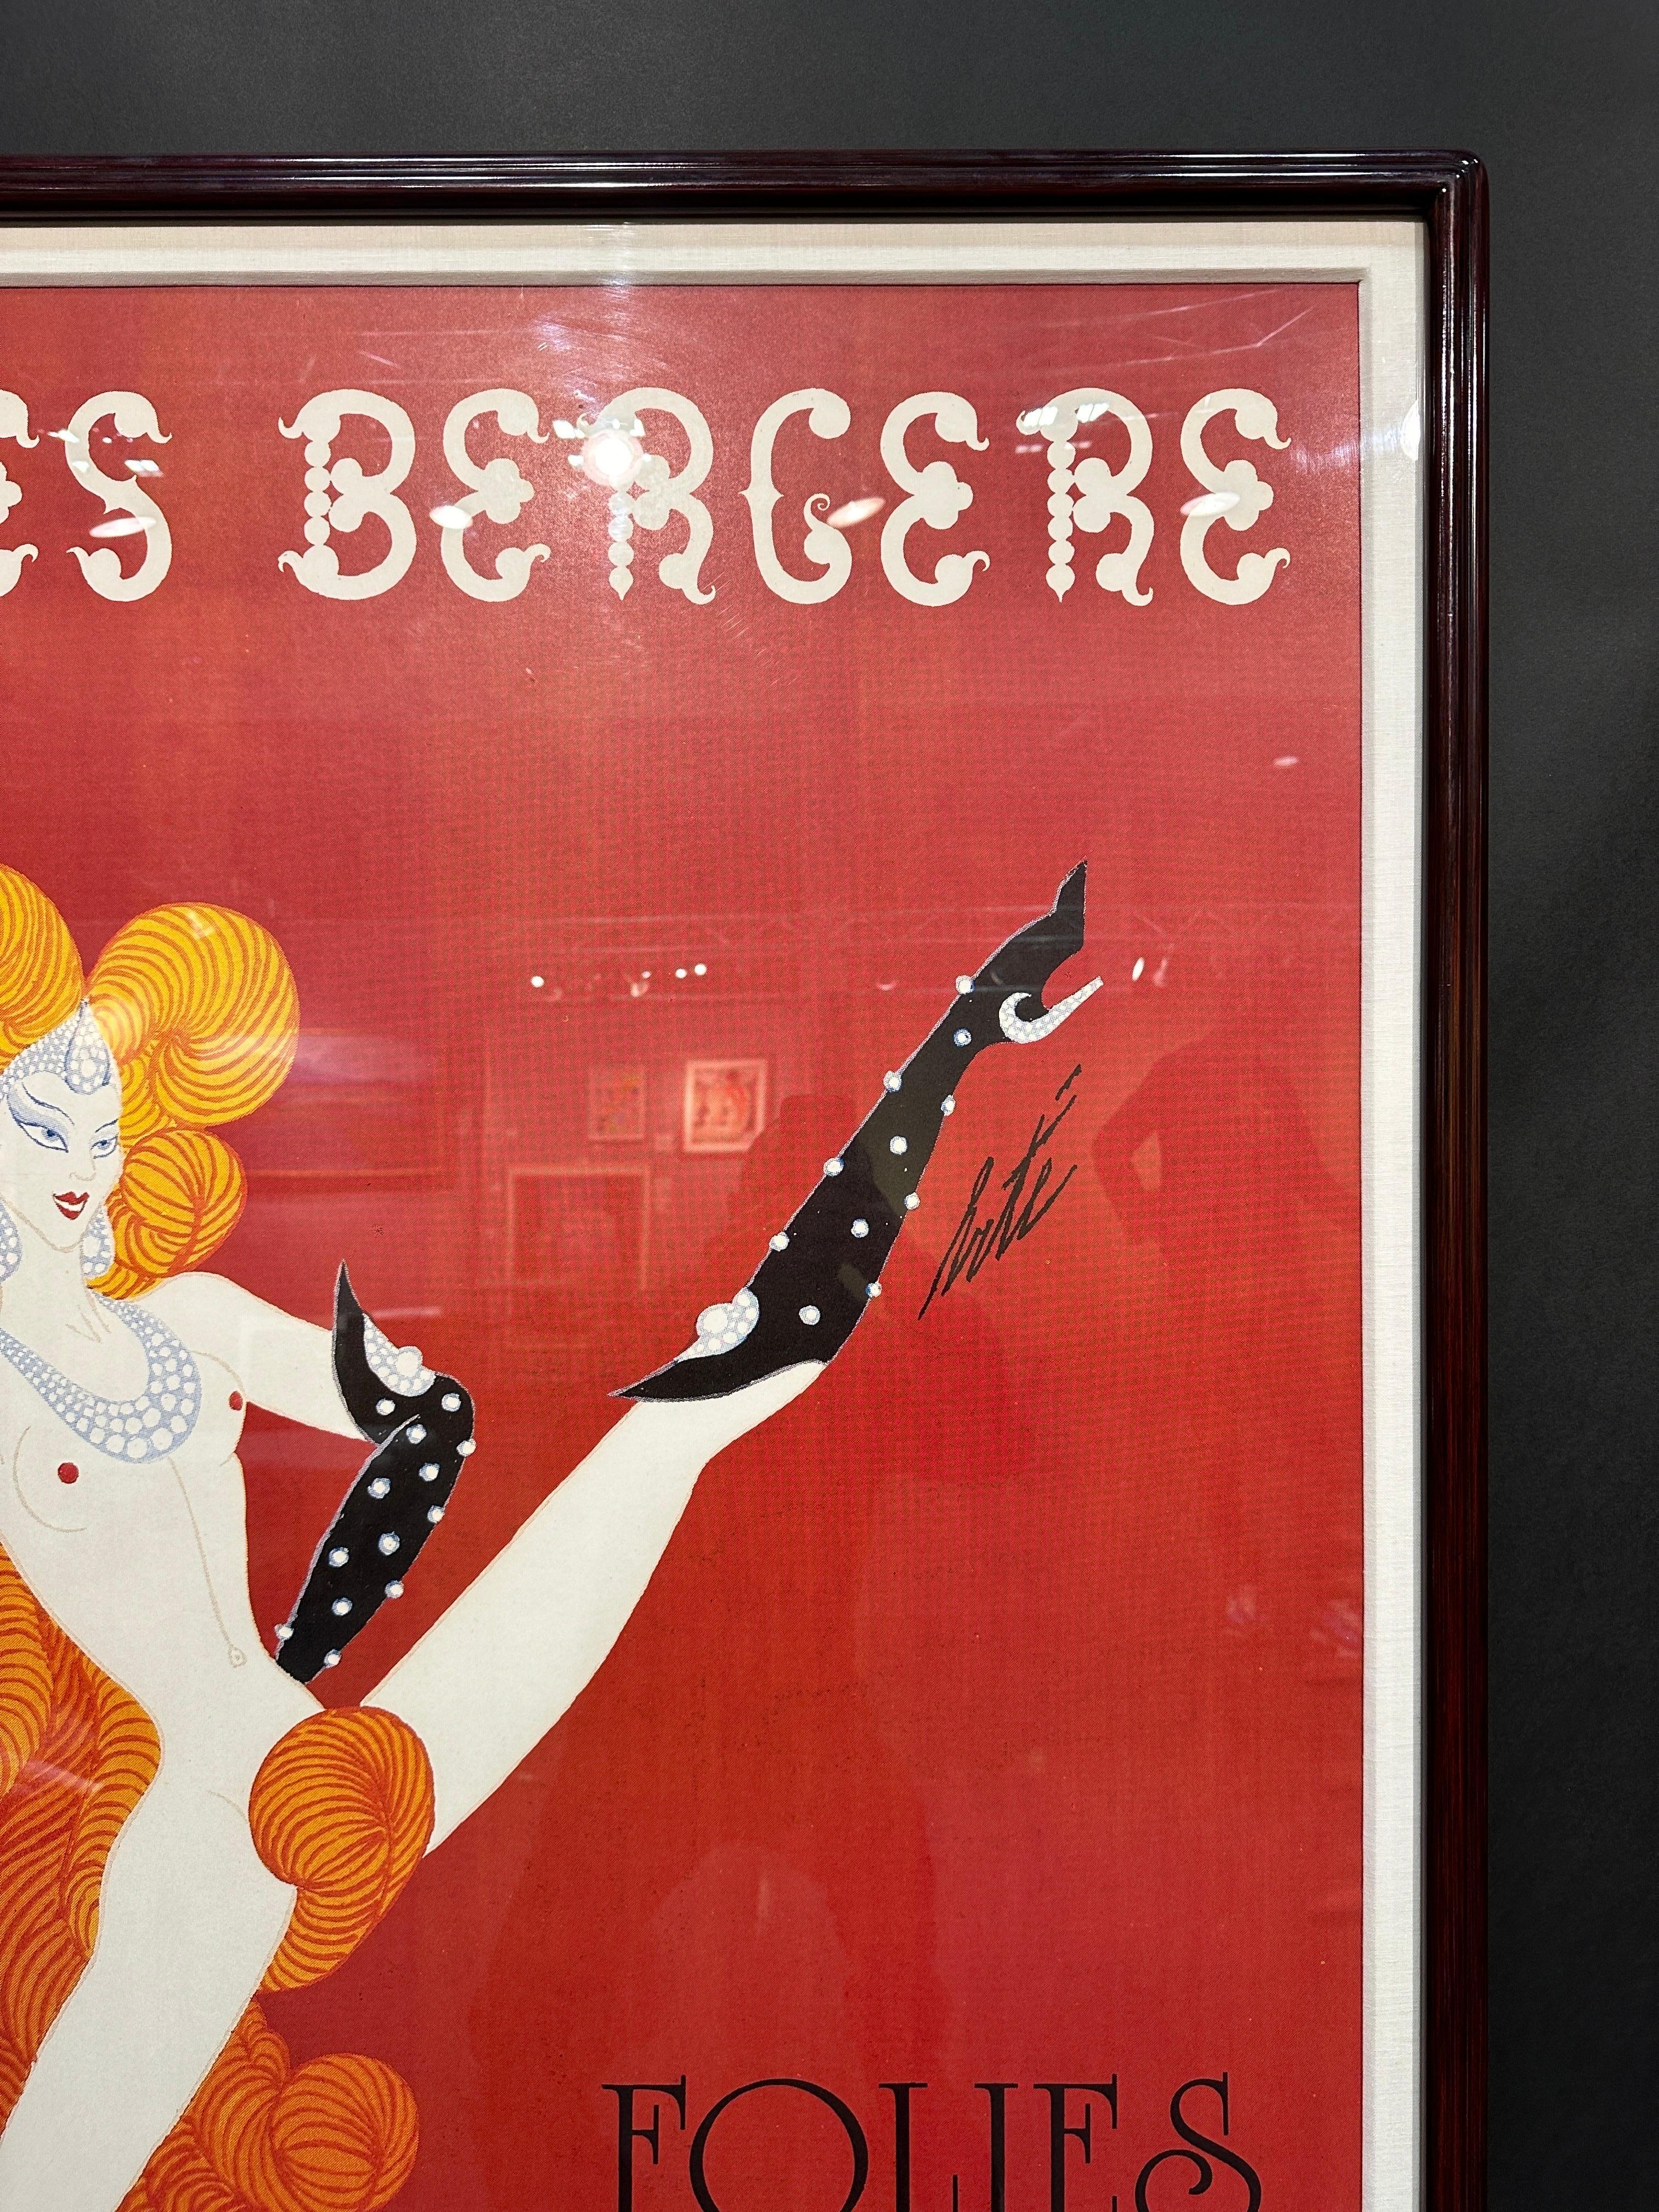 French Folis Bergere Poster by ERTE  For Sale